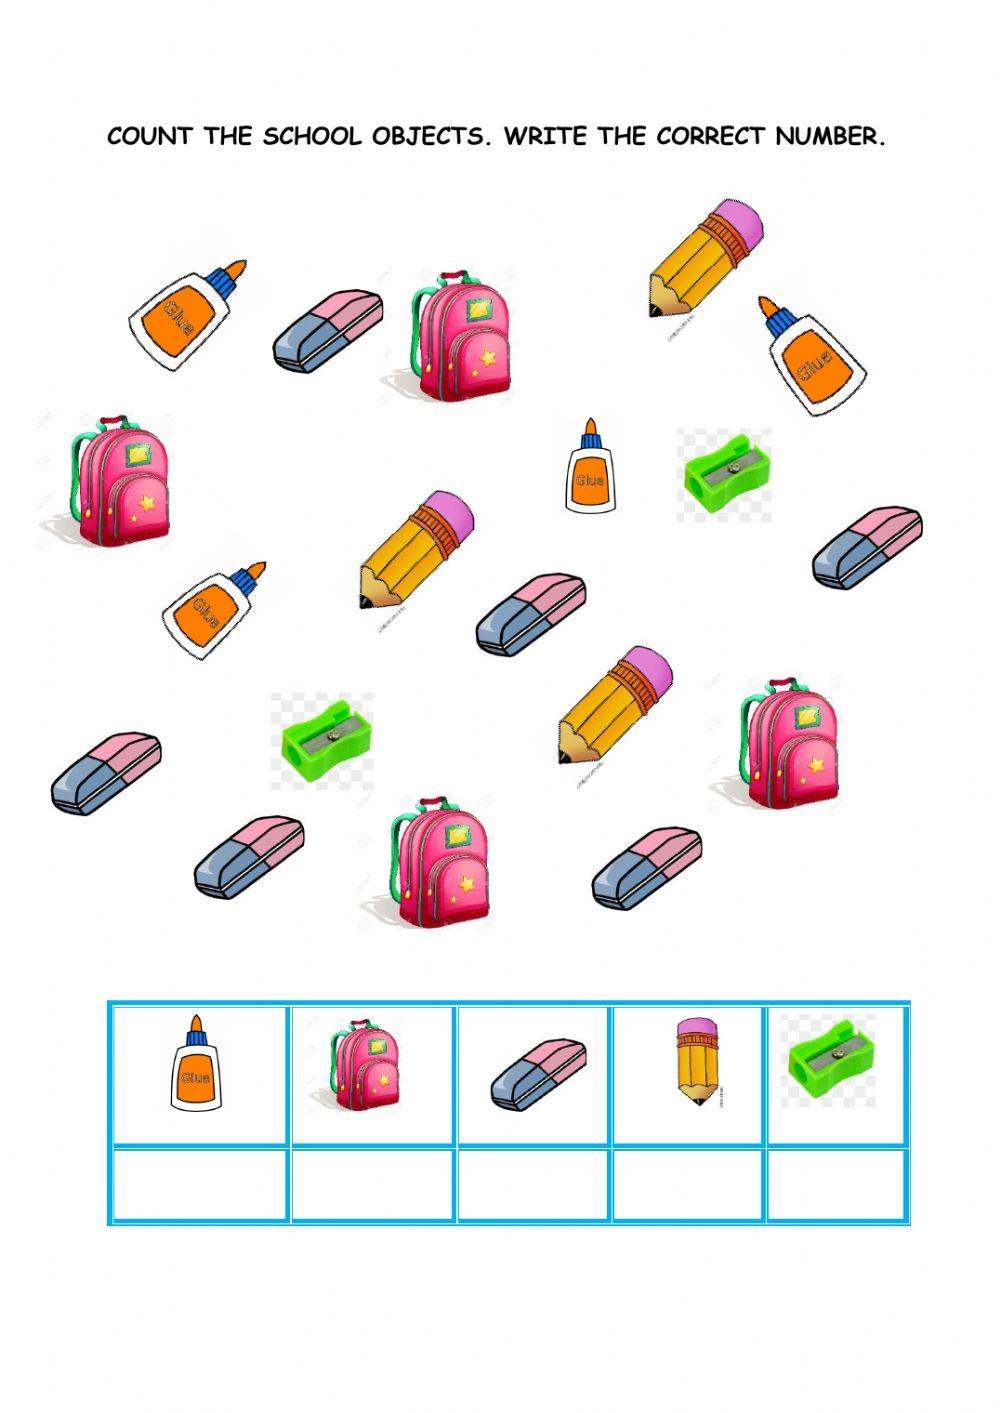 Counting school objects interactive worksheet | Live Worksheets